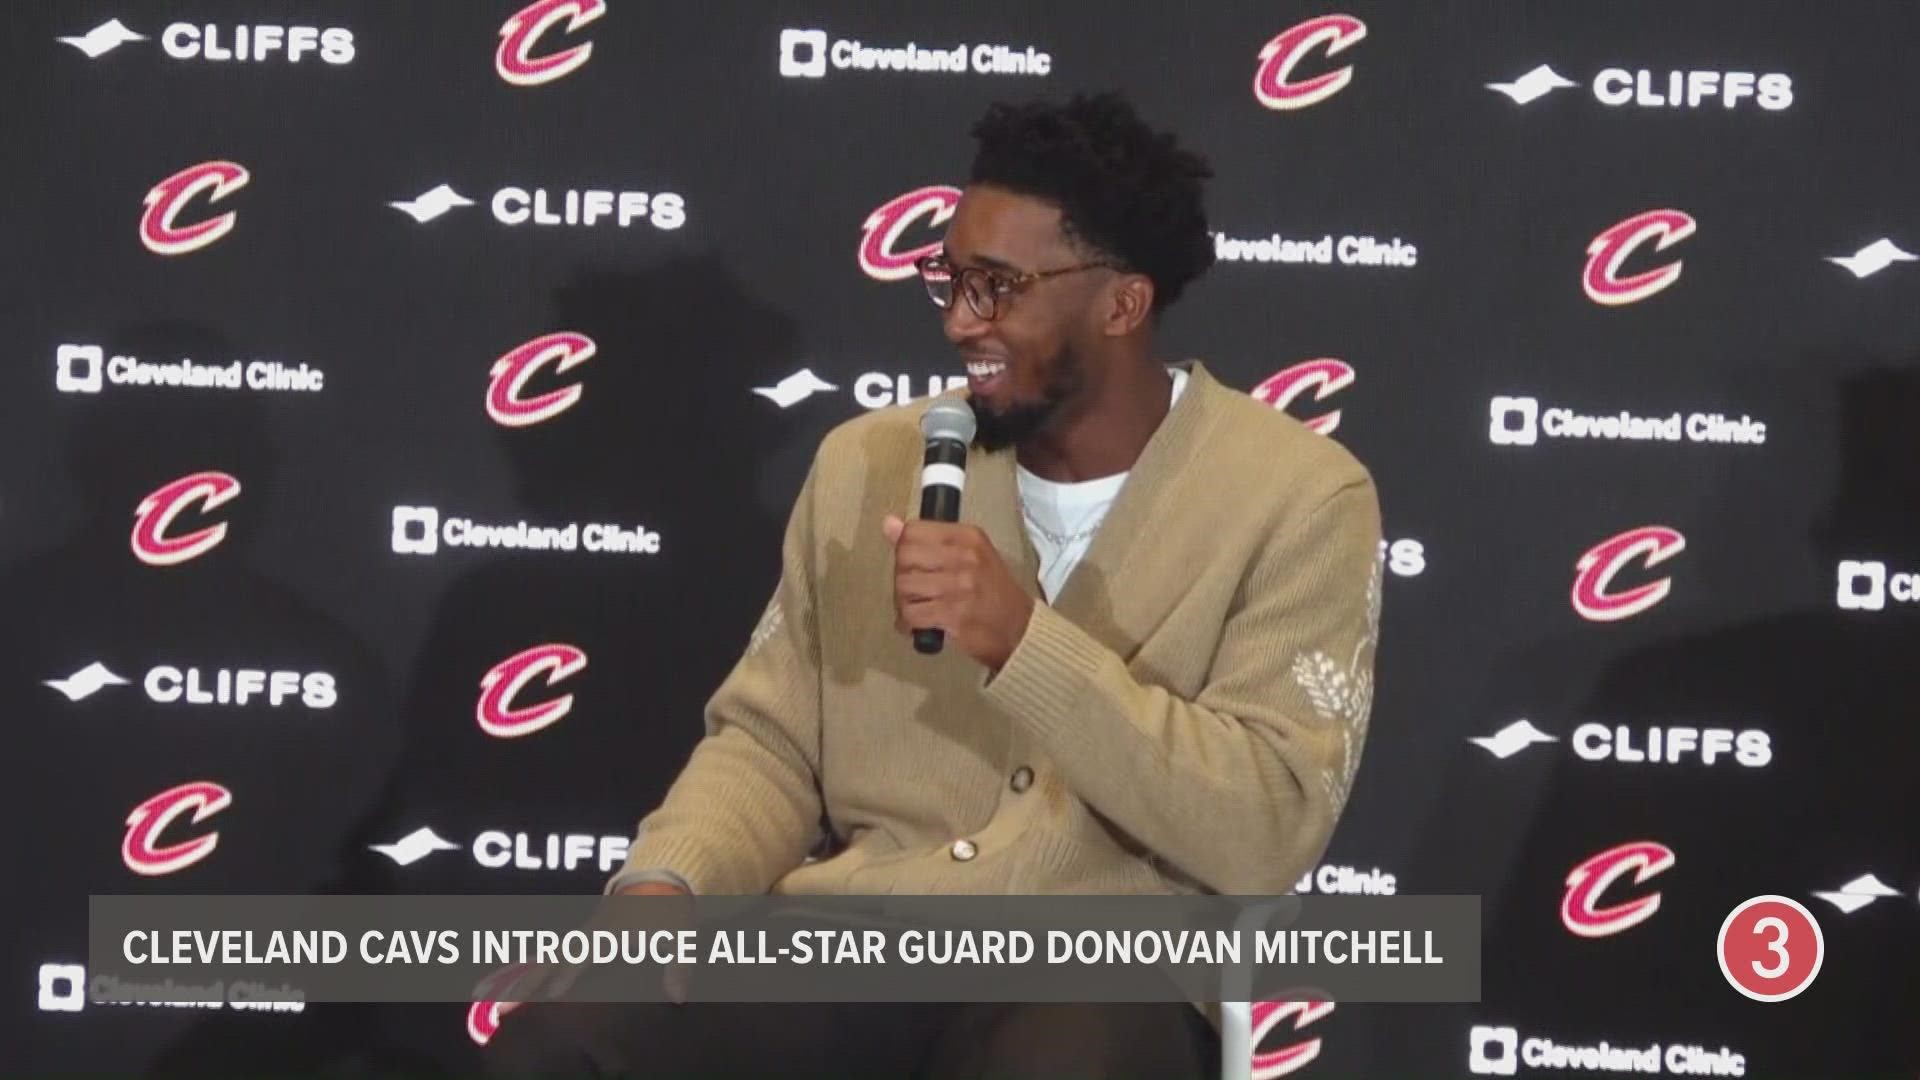 All-Star guard Donovan Mitchell shared what his reaction to being traded to the Cleveland Cavaliers was.